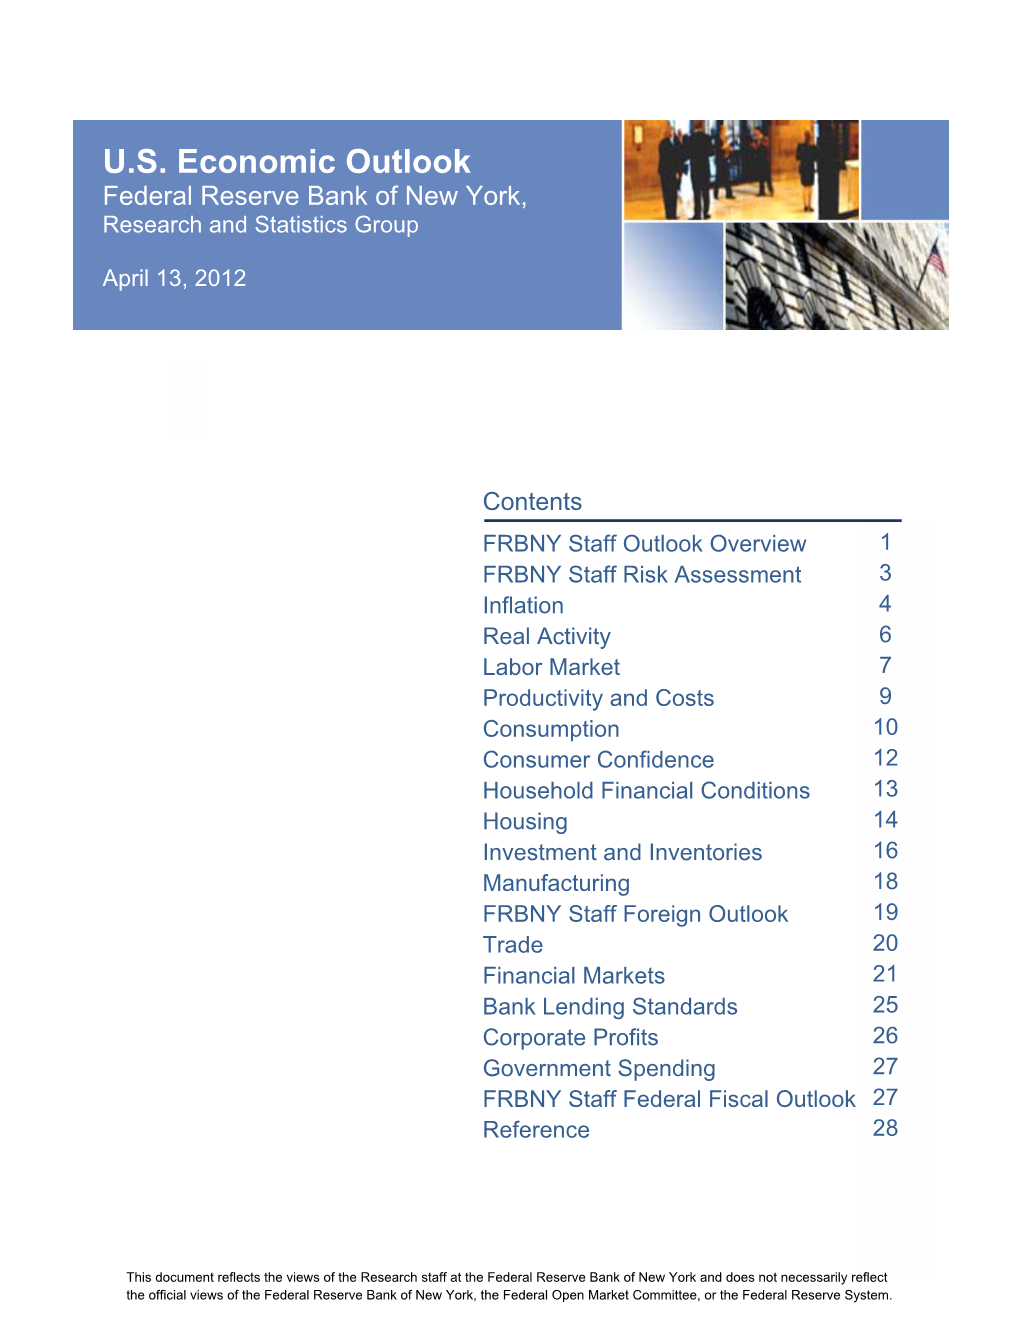 U.S. Economic Outlook Federal Reserve Bank of New York, Research and Statistics Group